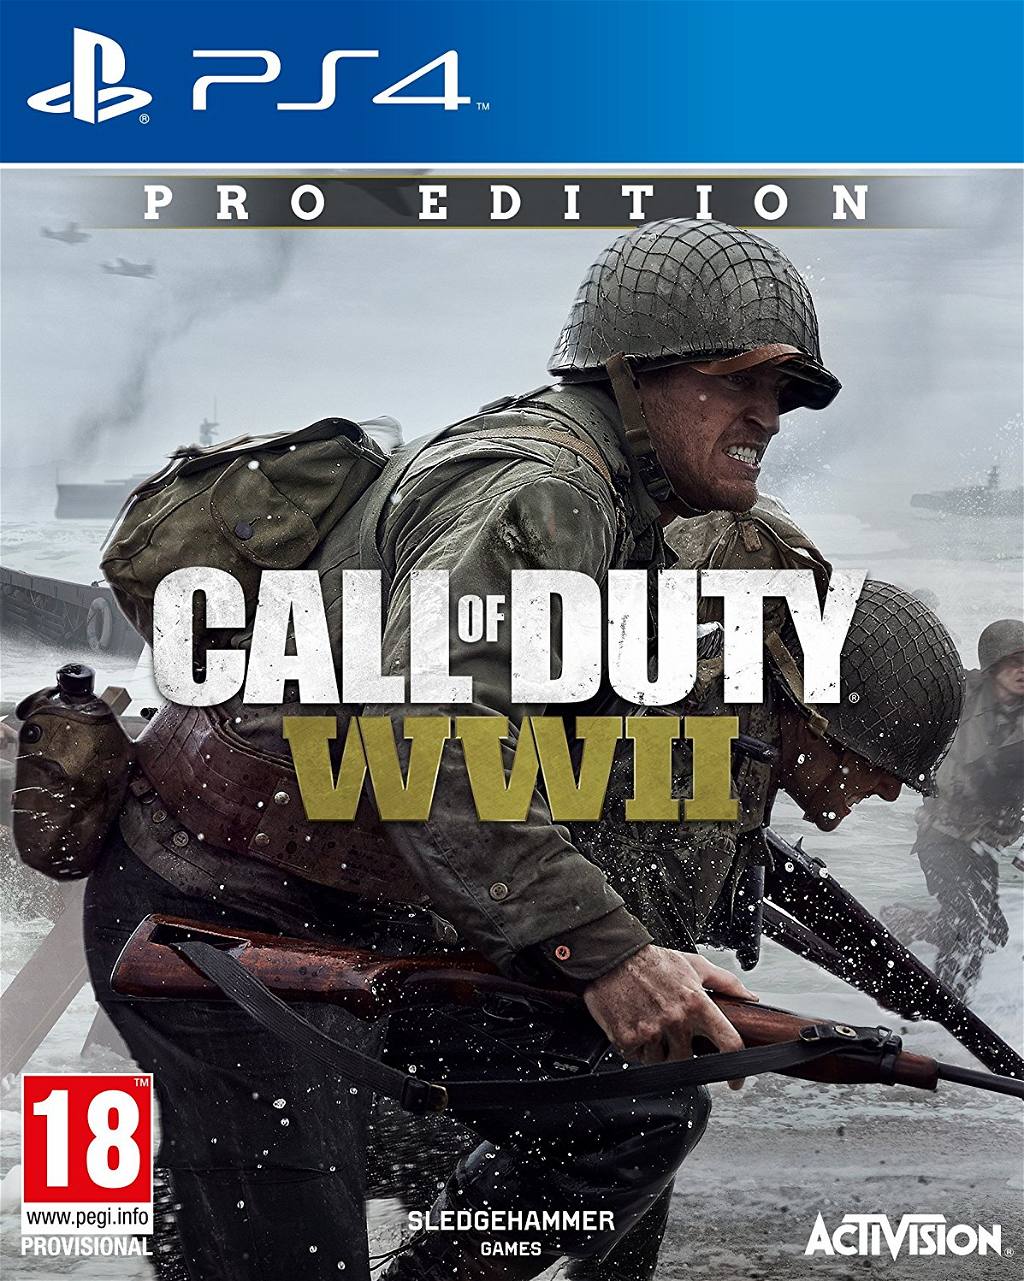 stang blyant by Call of Duty: WWII [Pro Edition] for PlayStation 4